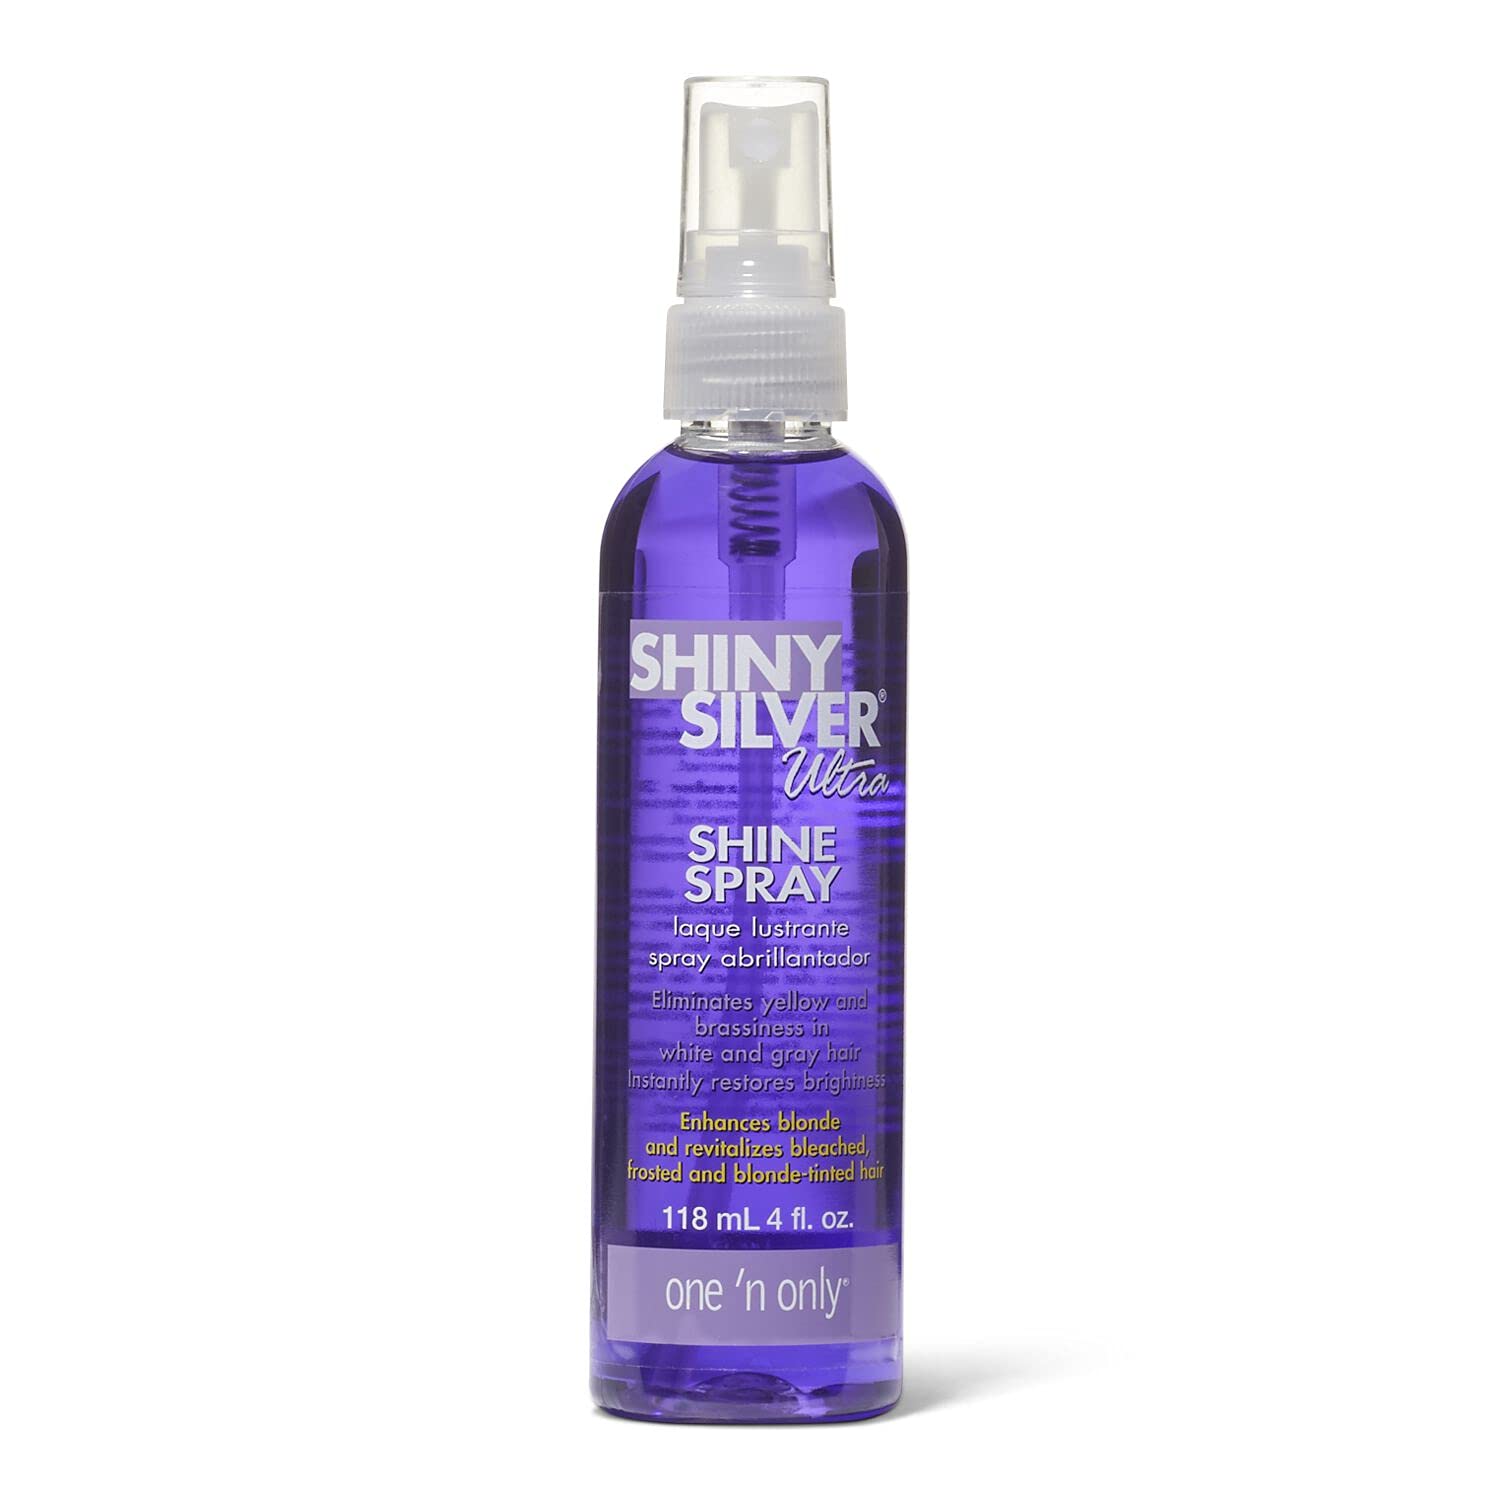 One 'n Only Shiny Silver Ultra Shine Spray, Restores [...]